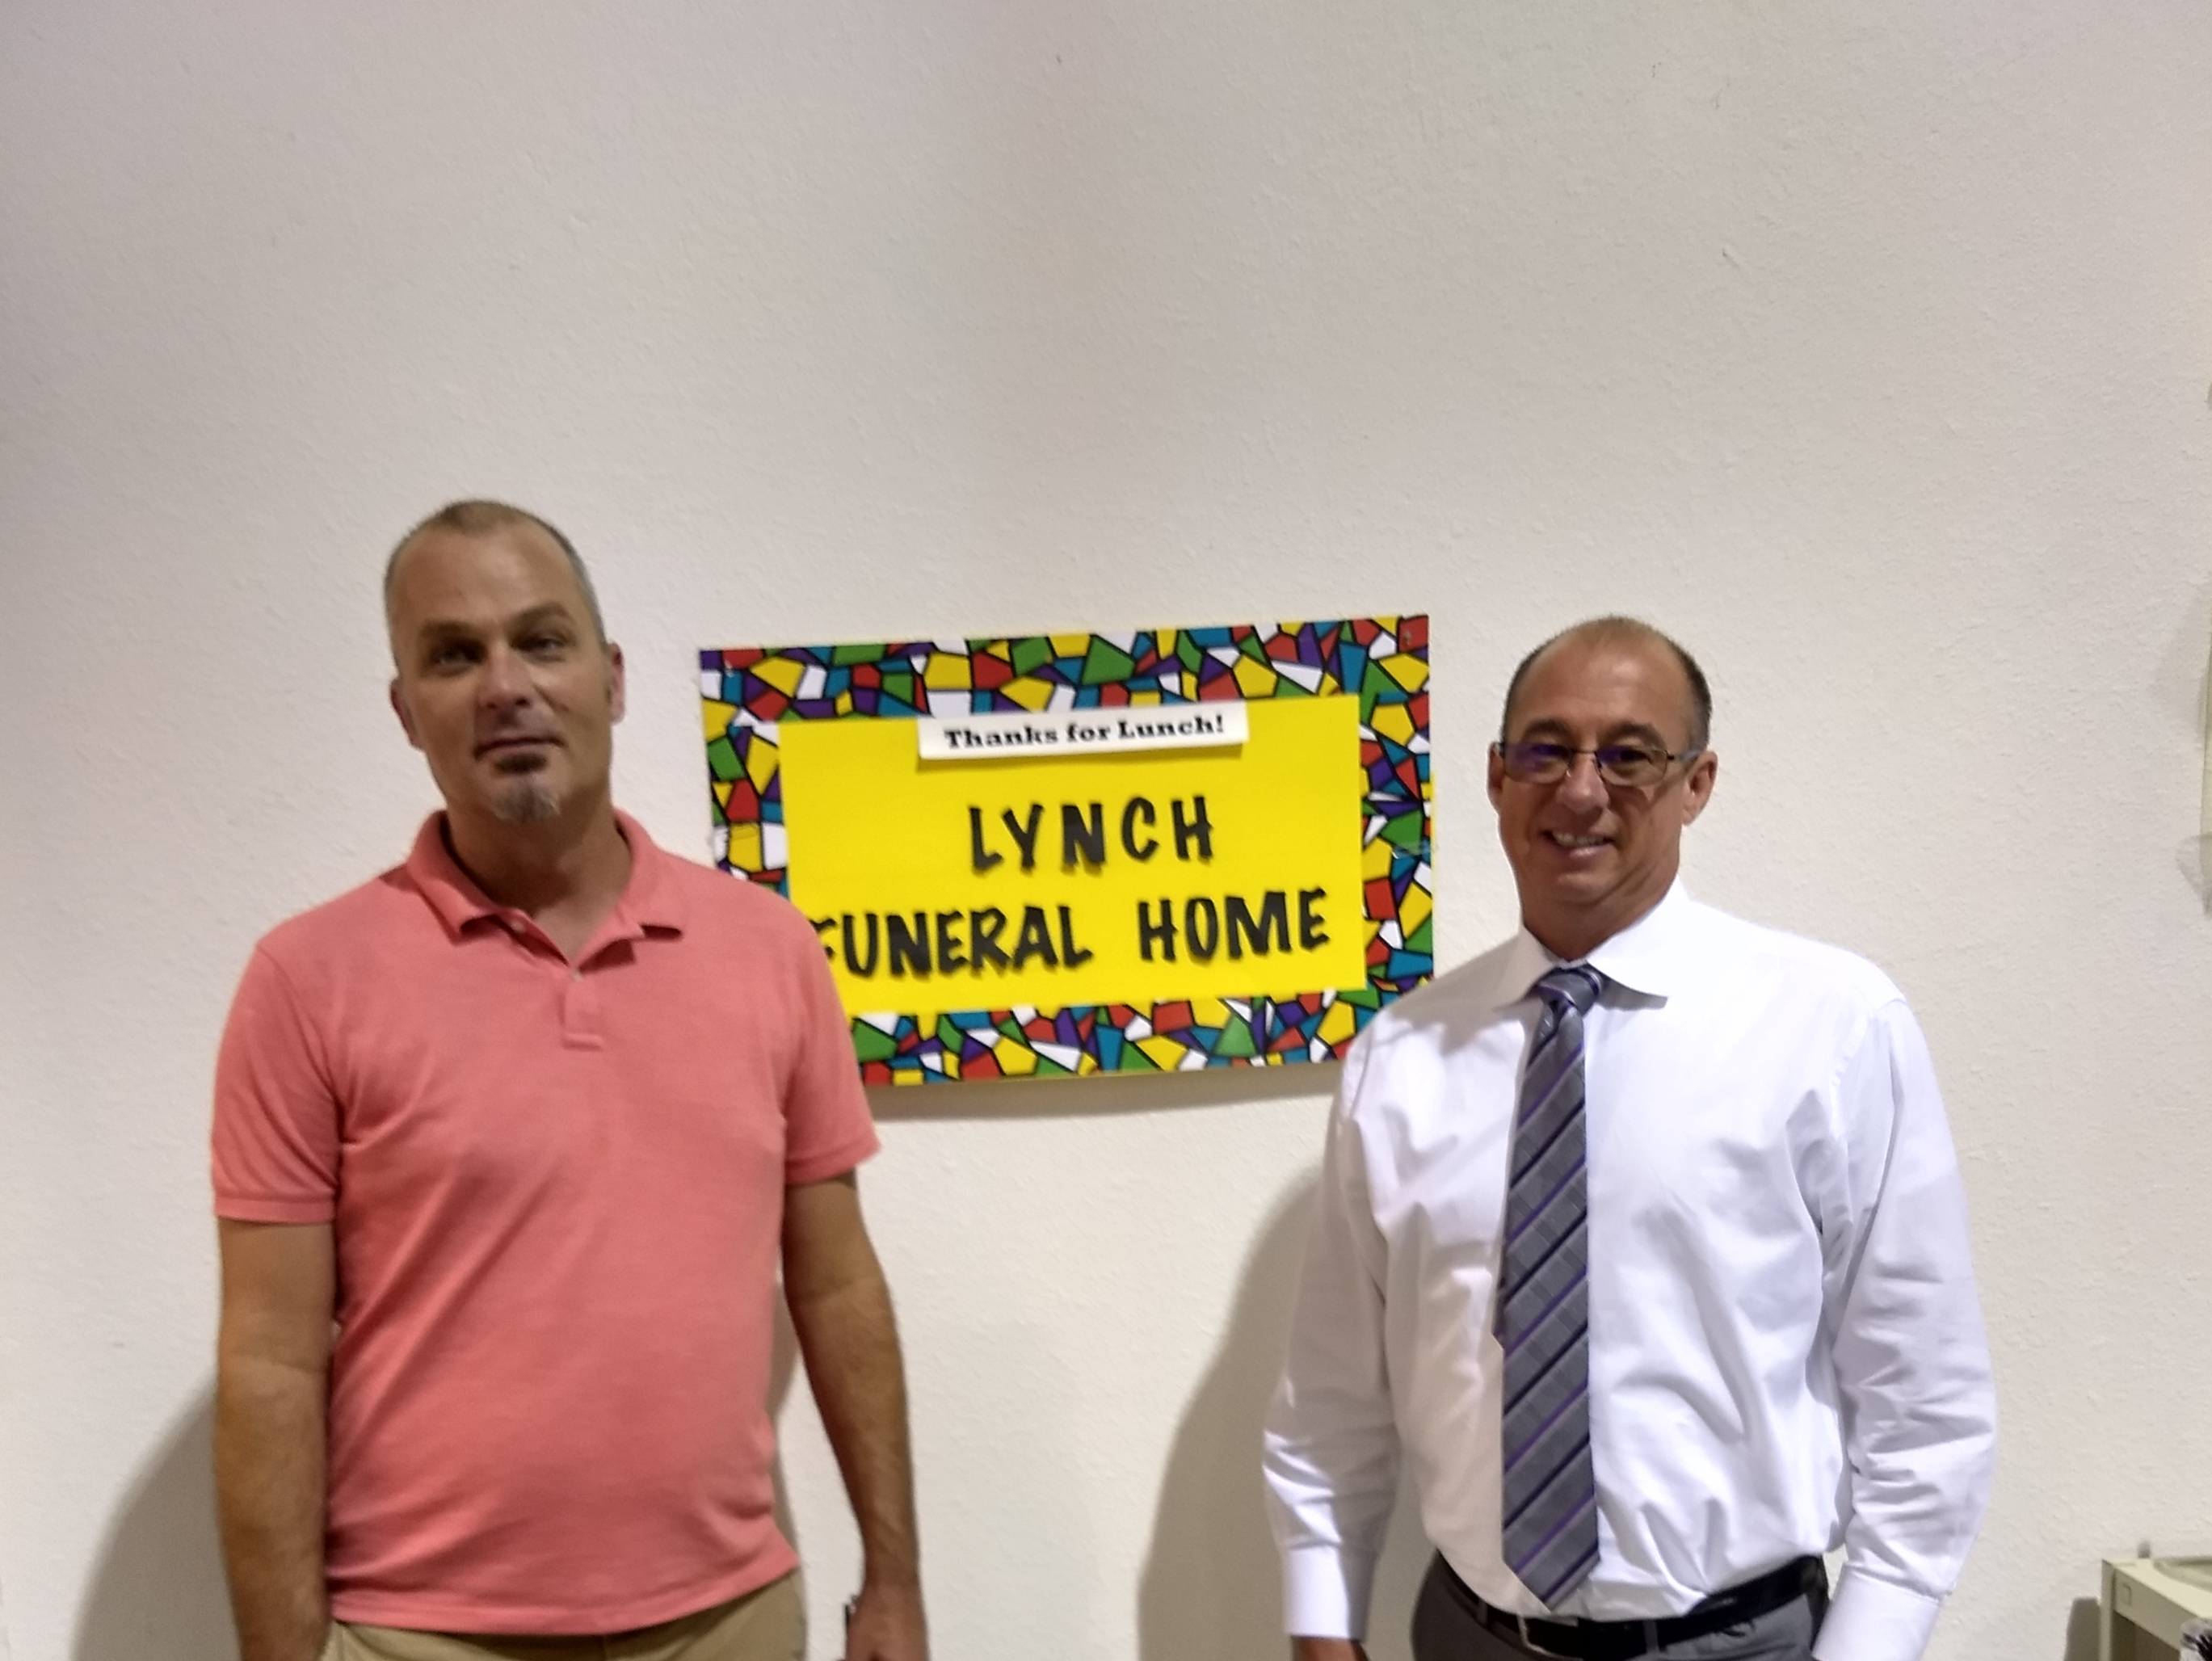 Lynch Funeral Home sponsor during month of July.  Thank you for the delicious lunch!